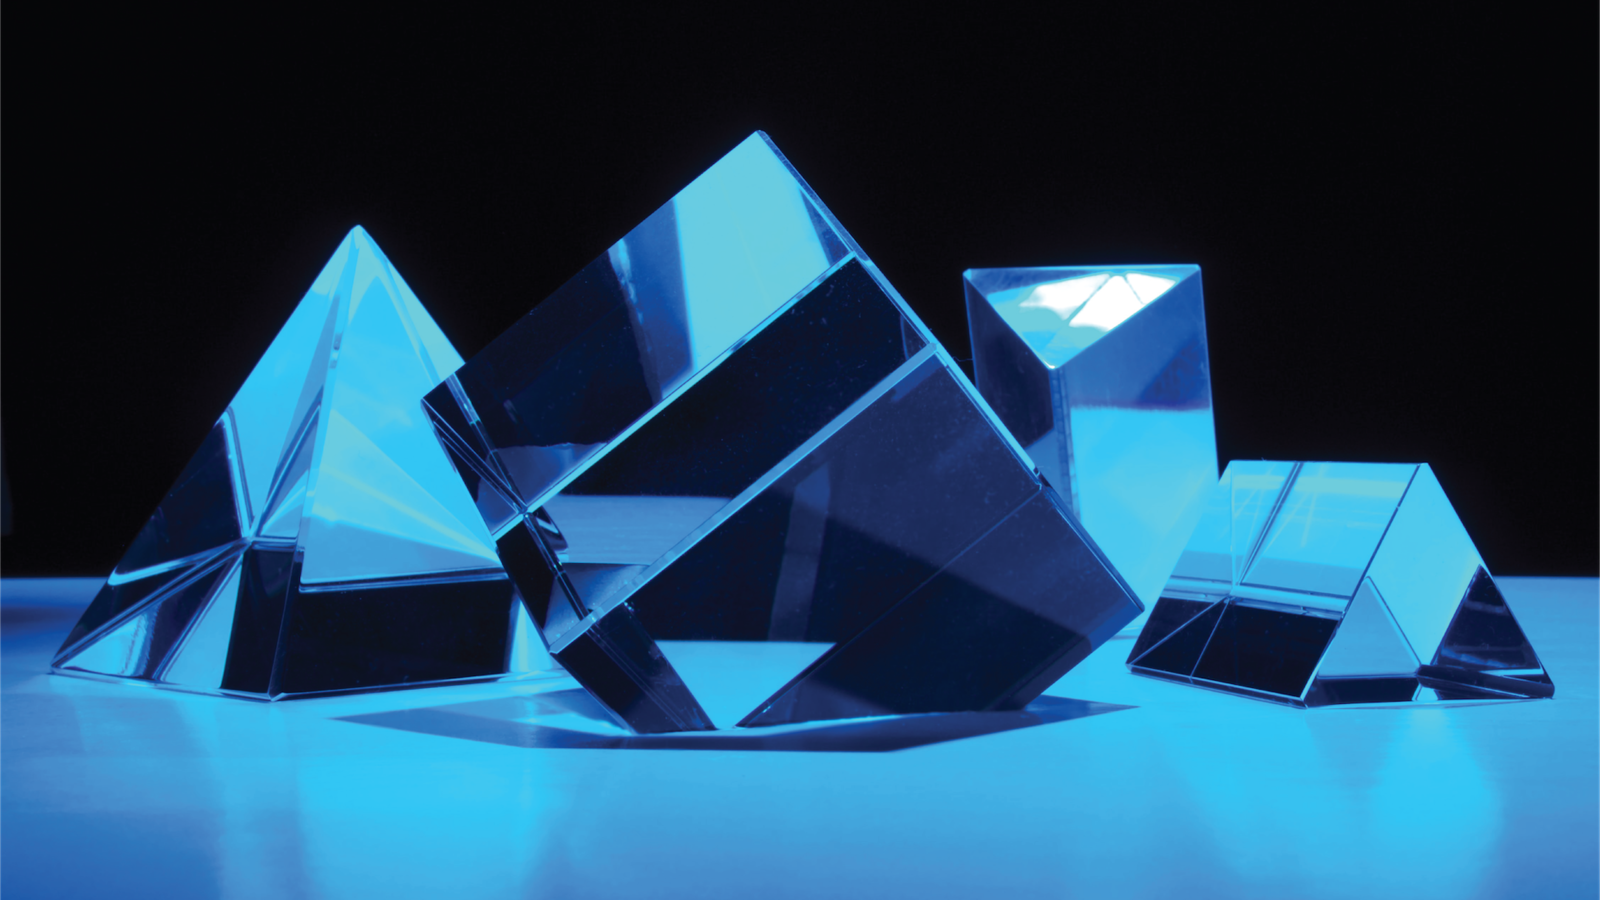 Mirrored glass shapes with blue light on them